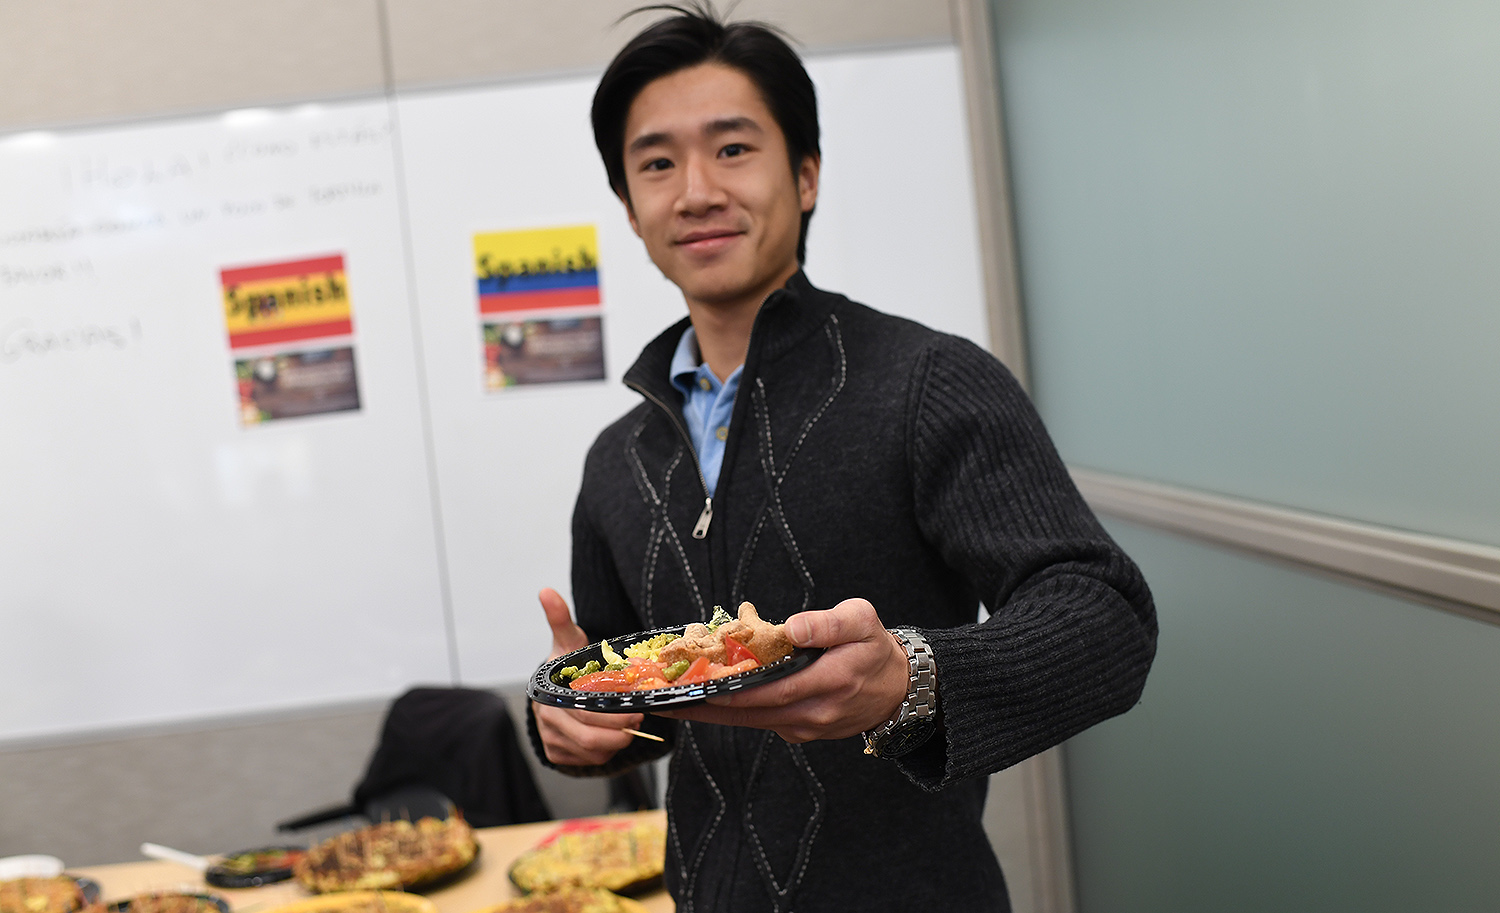 On Nov. 15, the Fries Center for Global studies hosted a "Food Around the World" luncheon which combined language learning with ethnic food. 